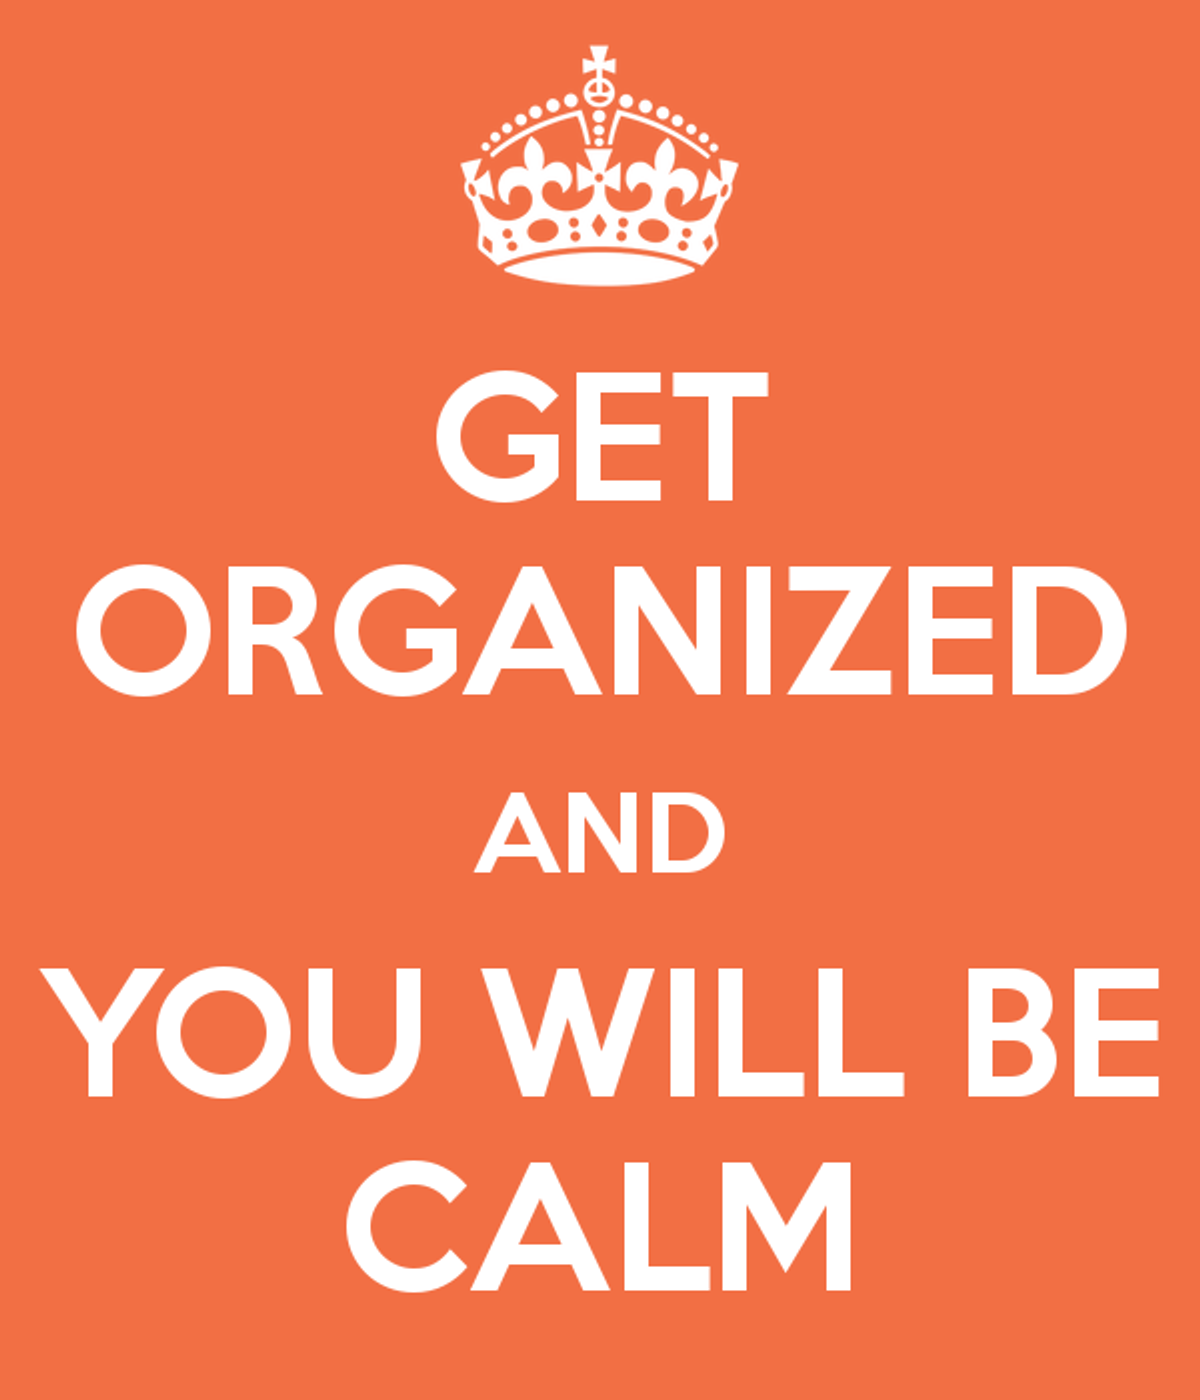 Three Basic Tips To Being Organized